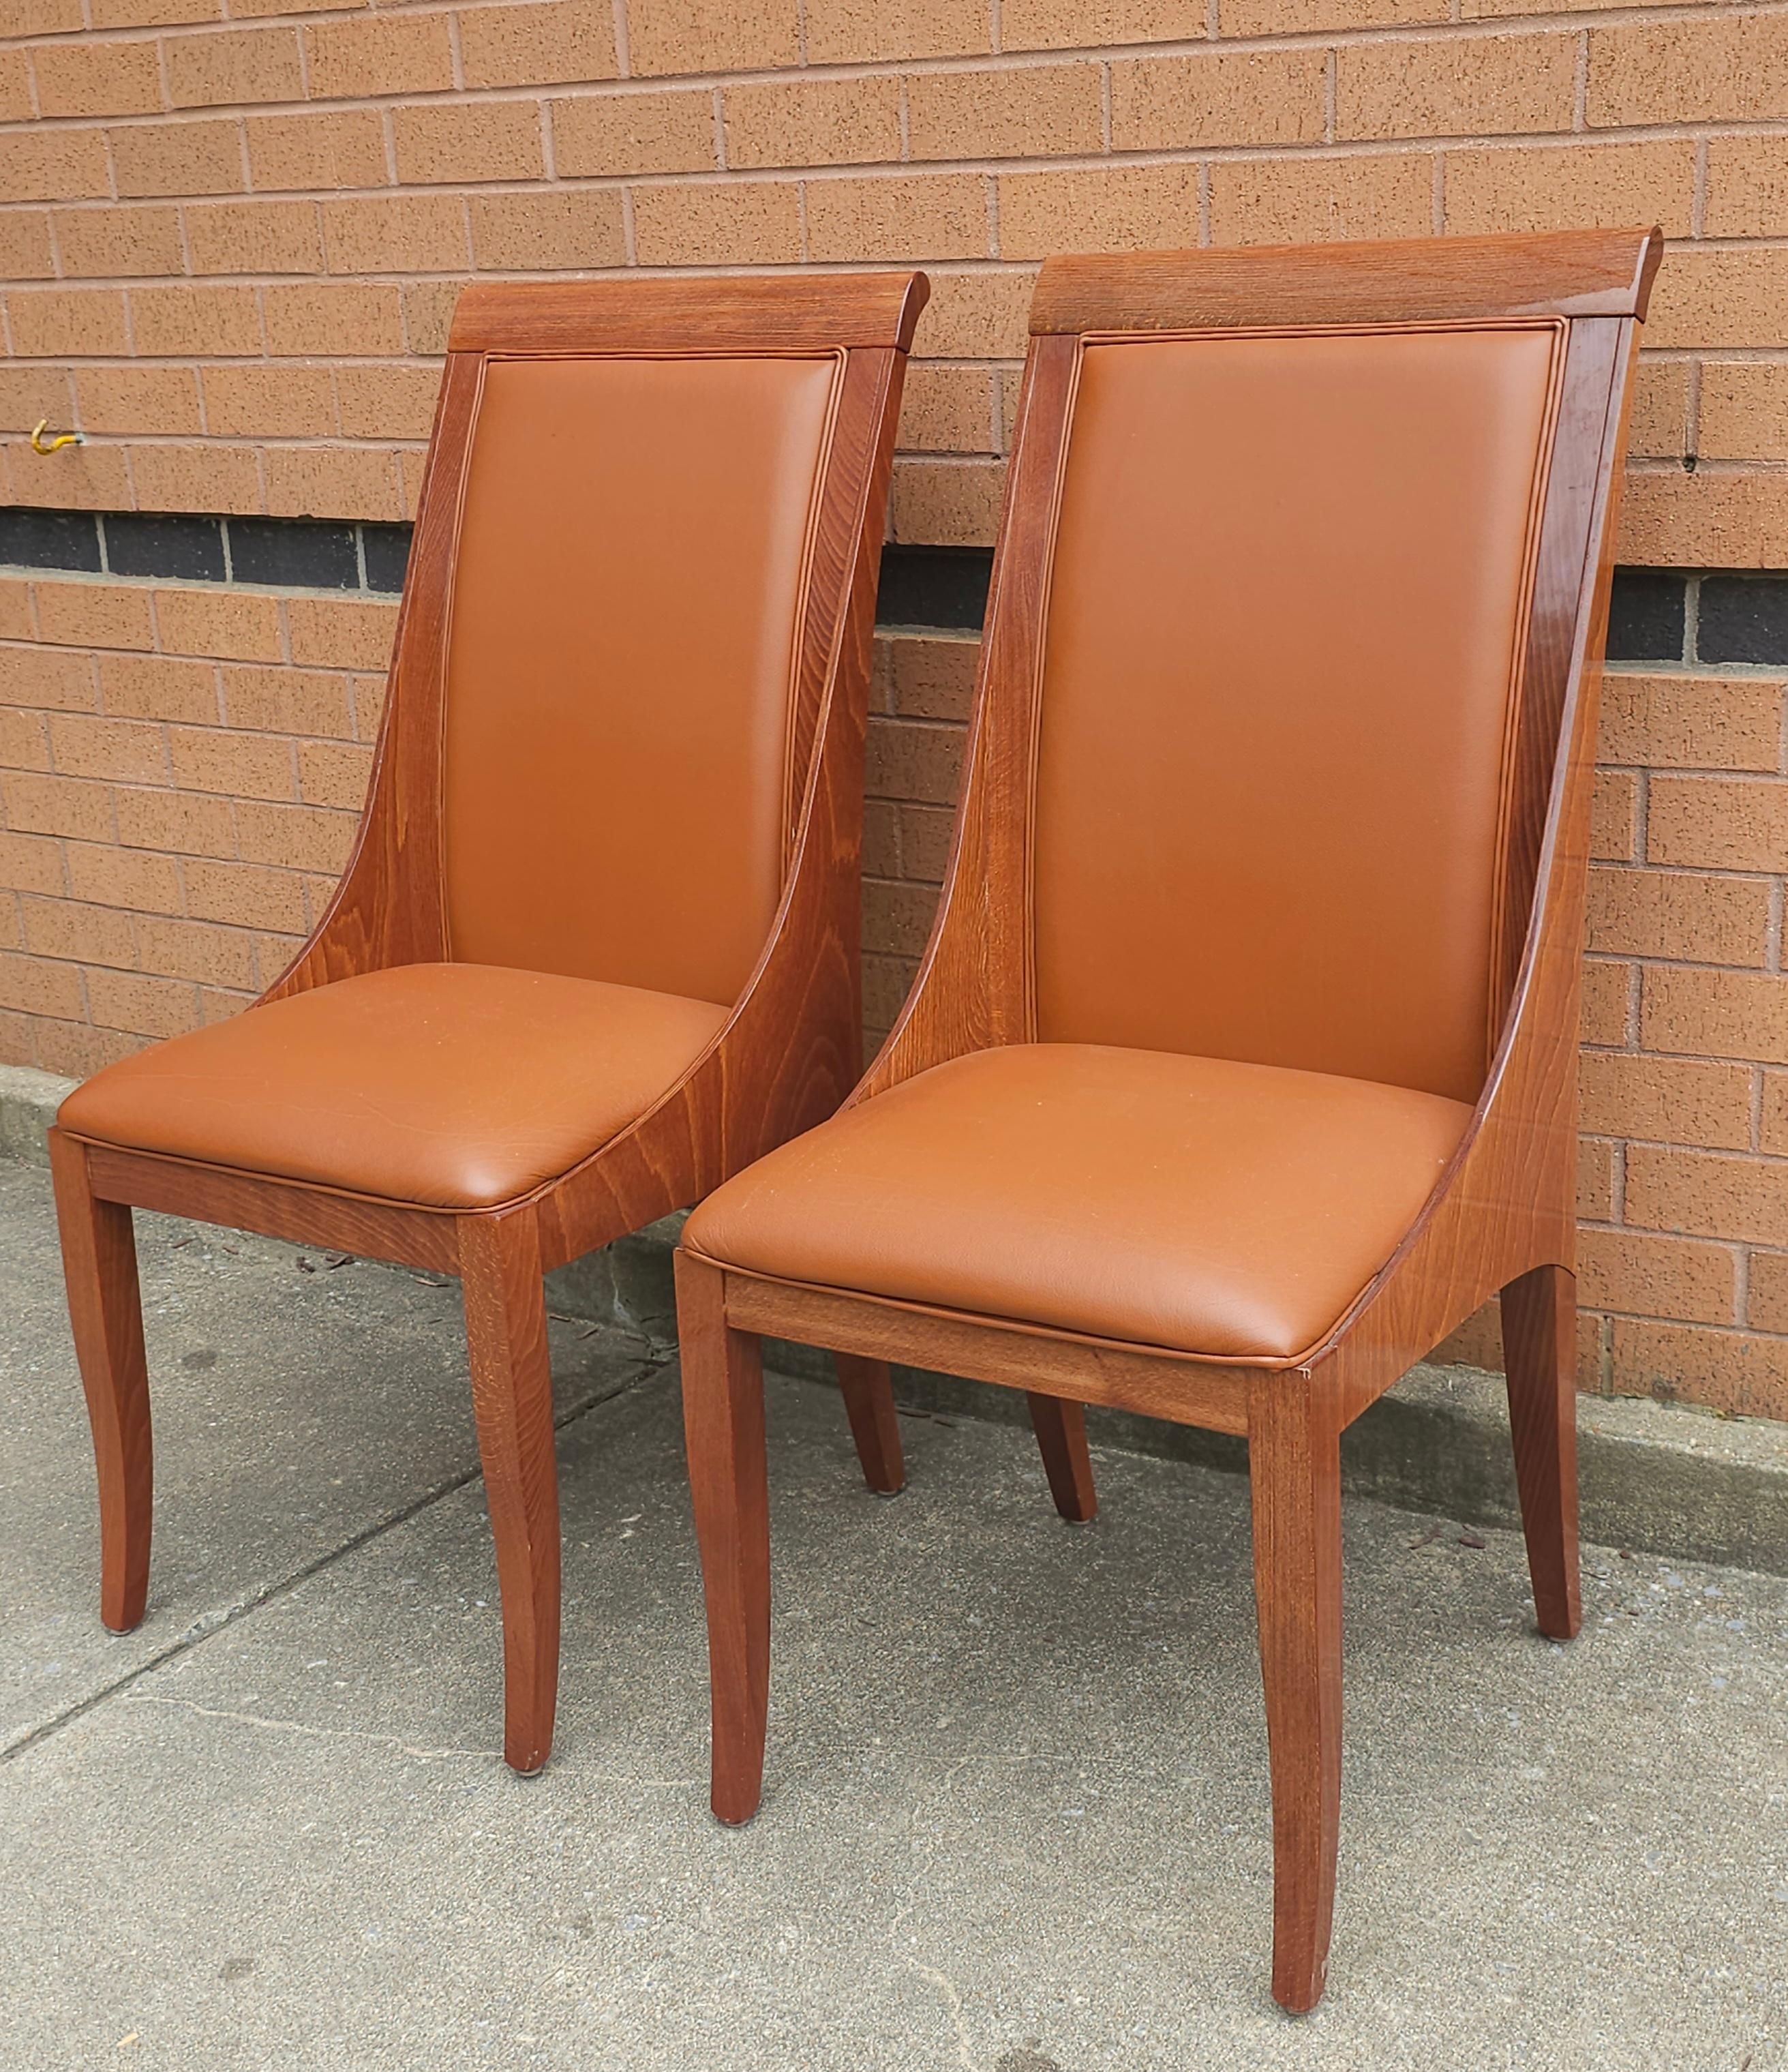 Set of Four Constantini Pietro Rosewood and Leather Upholstered Dining Chairs In Excellent Condition For Sale In Germantown, MD